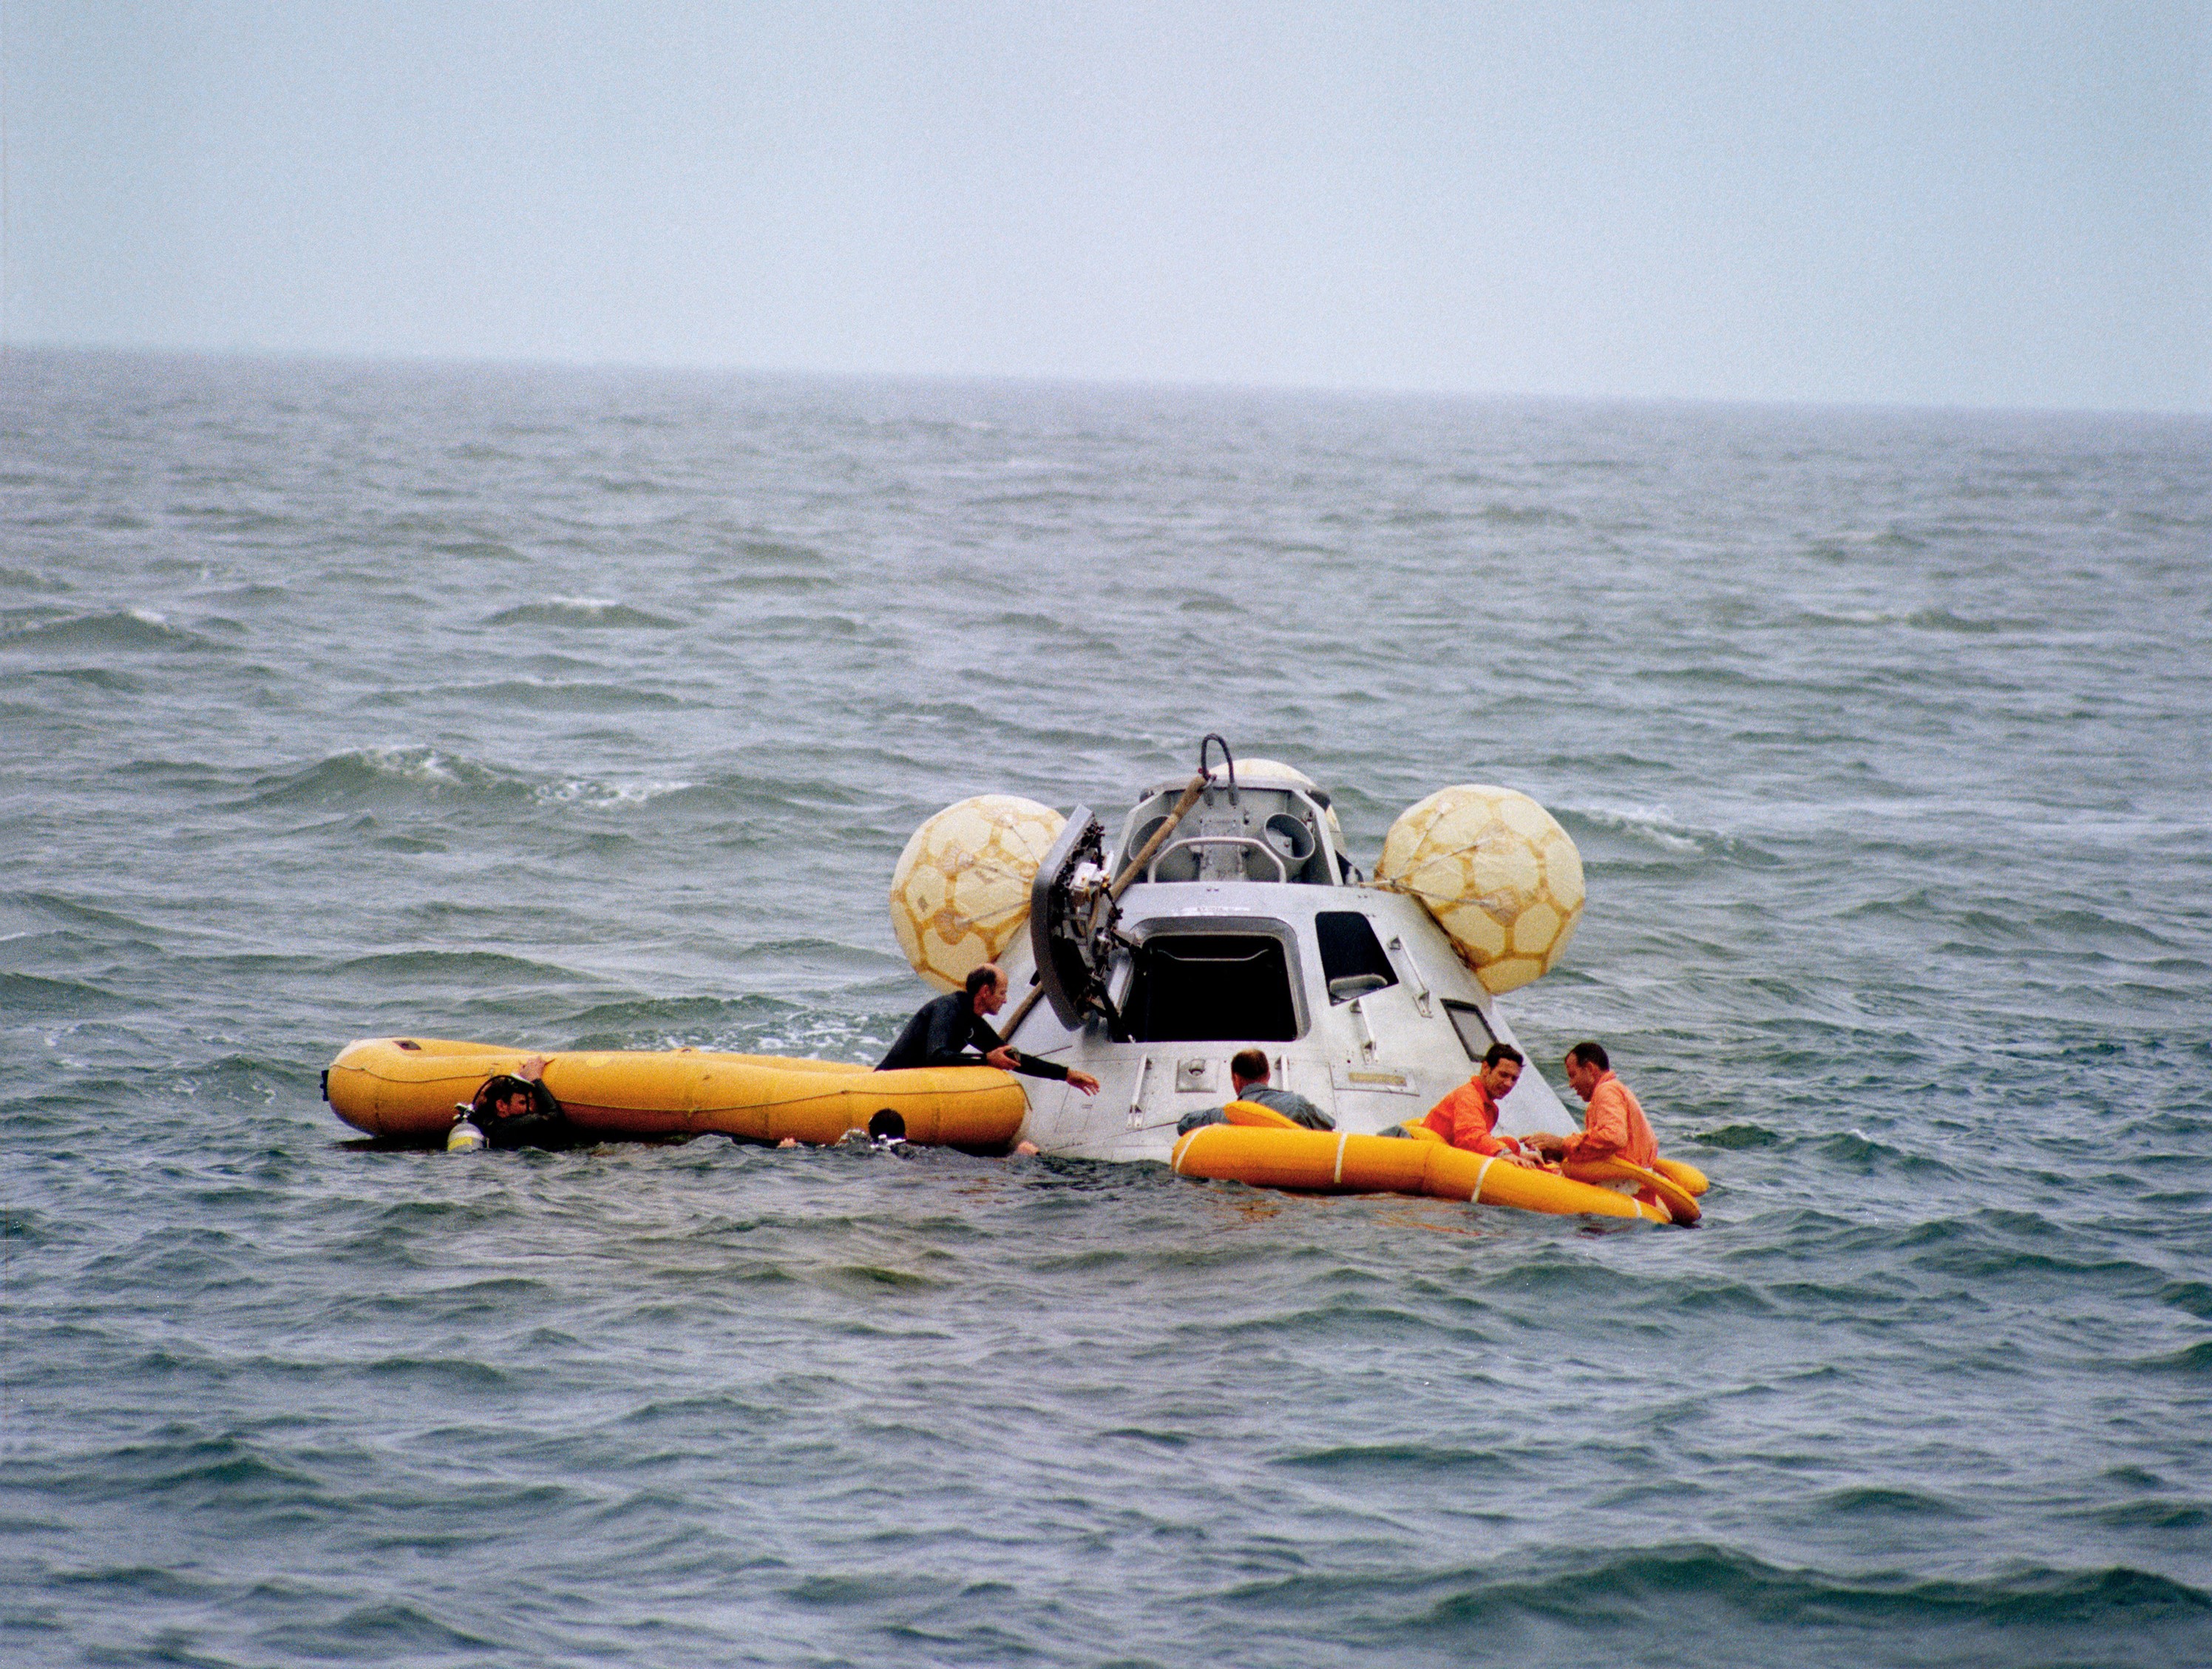 Mitchell, left, Eisele, and Cooper in the life raft await pickup by a helicopter during the water egress test